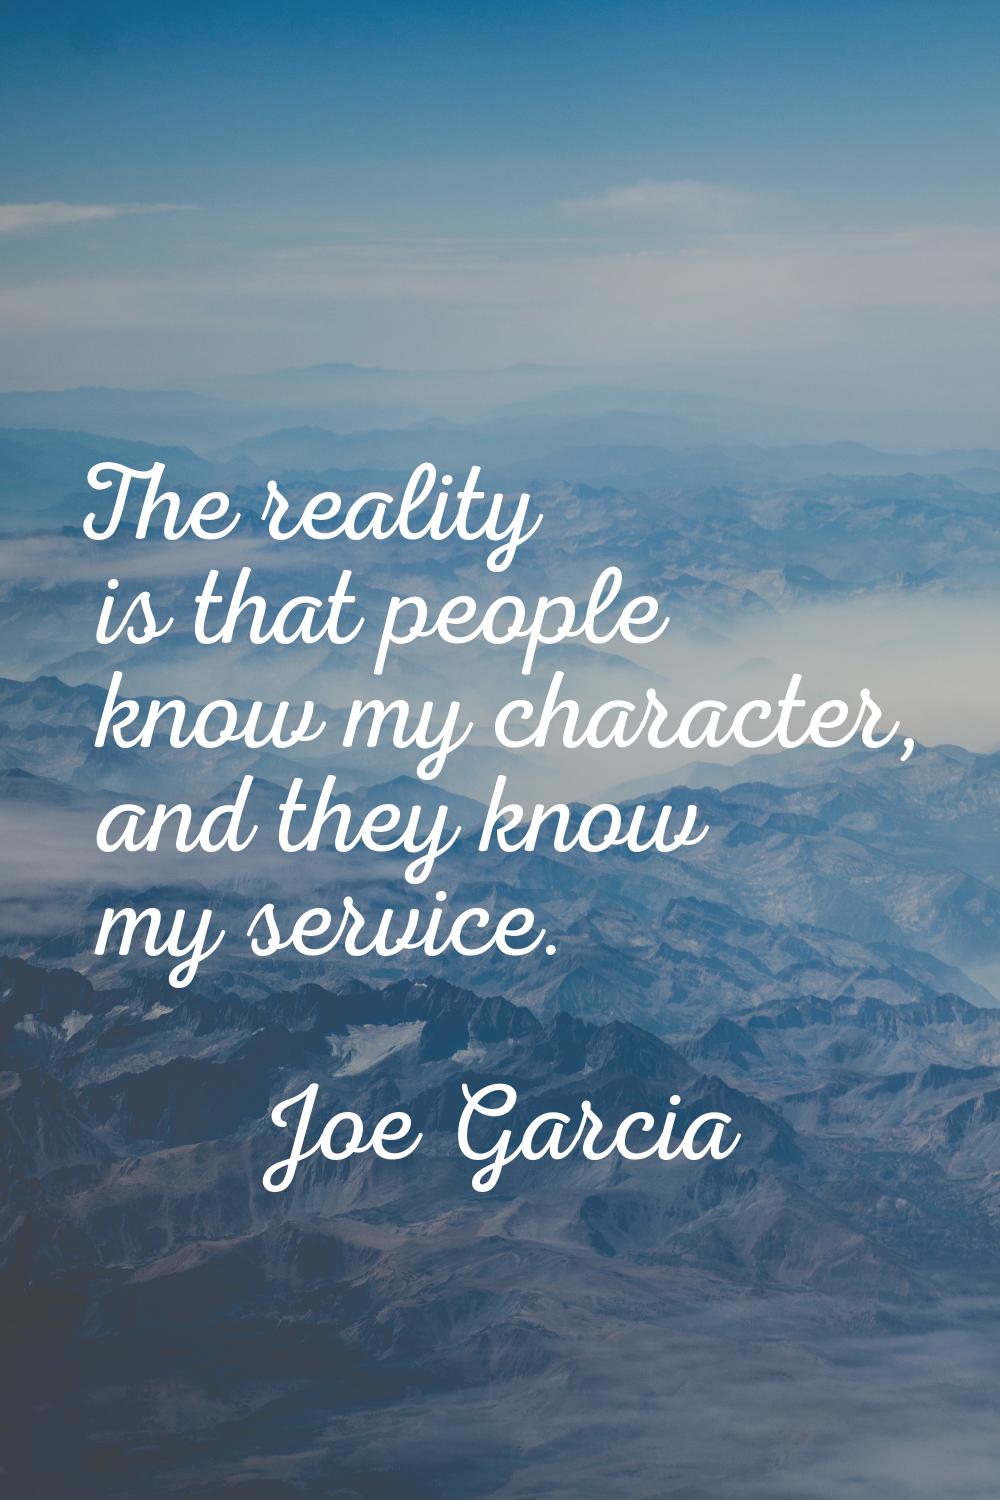 The reality is that people know my character, and they know my service.